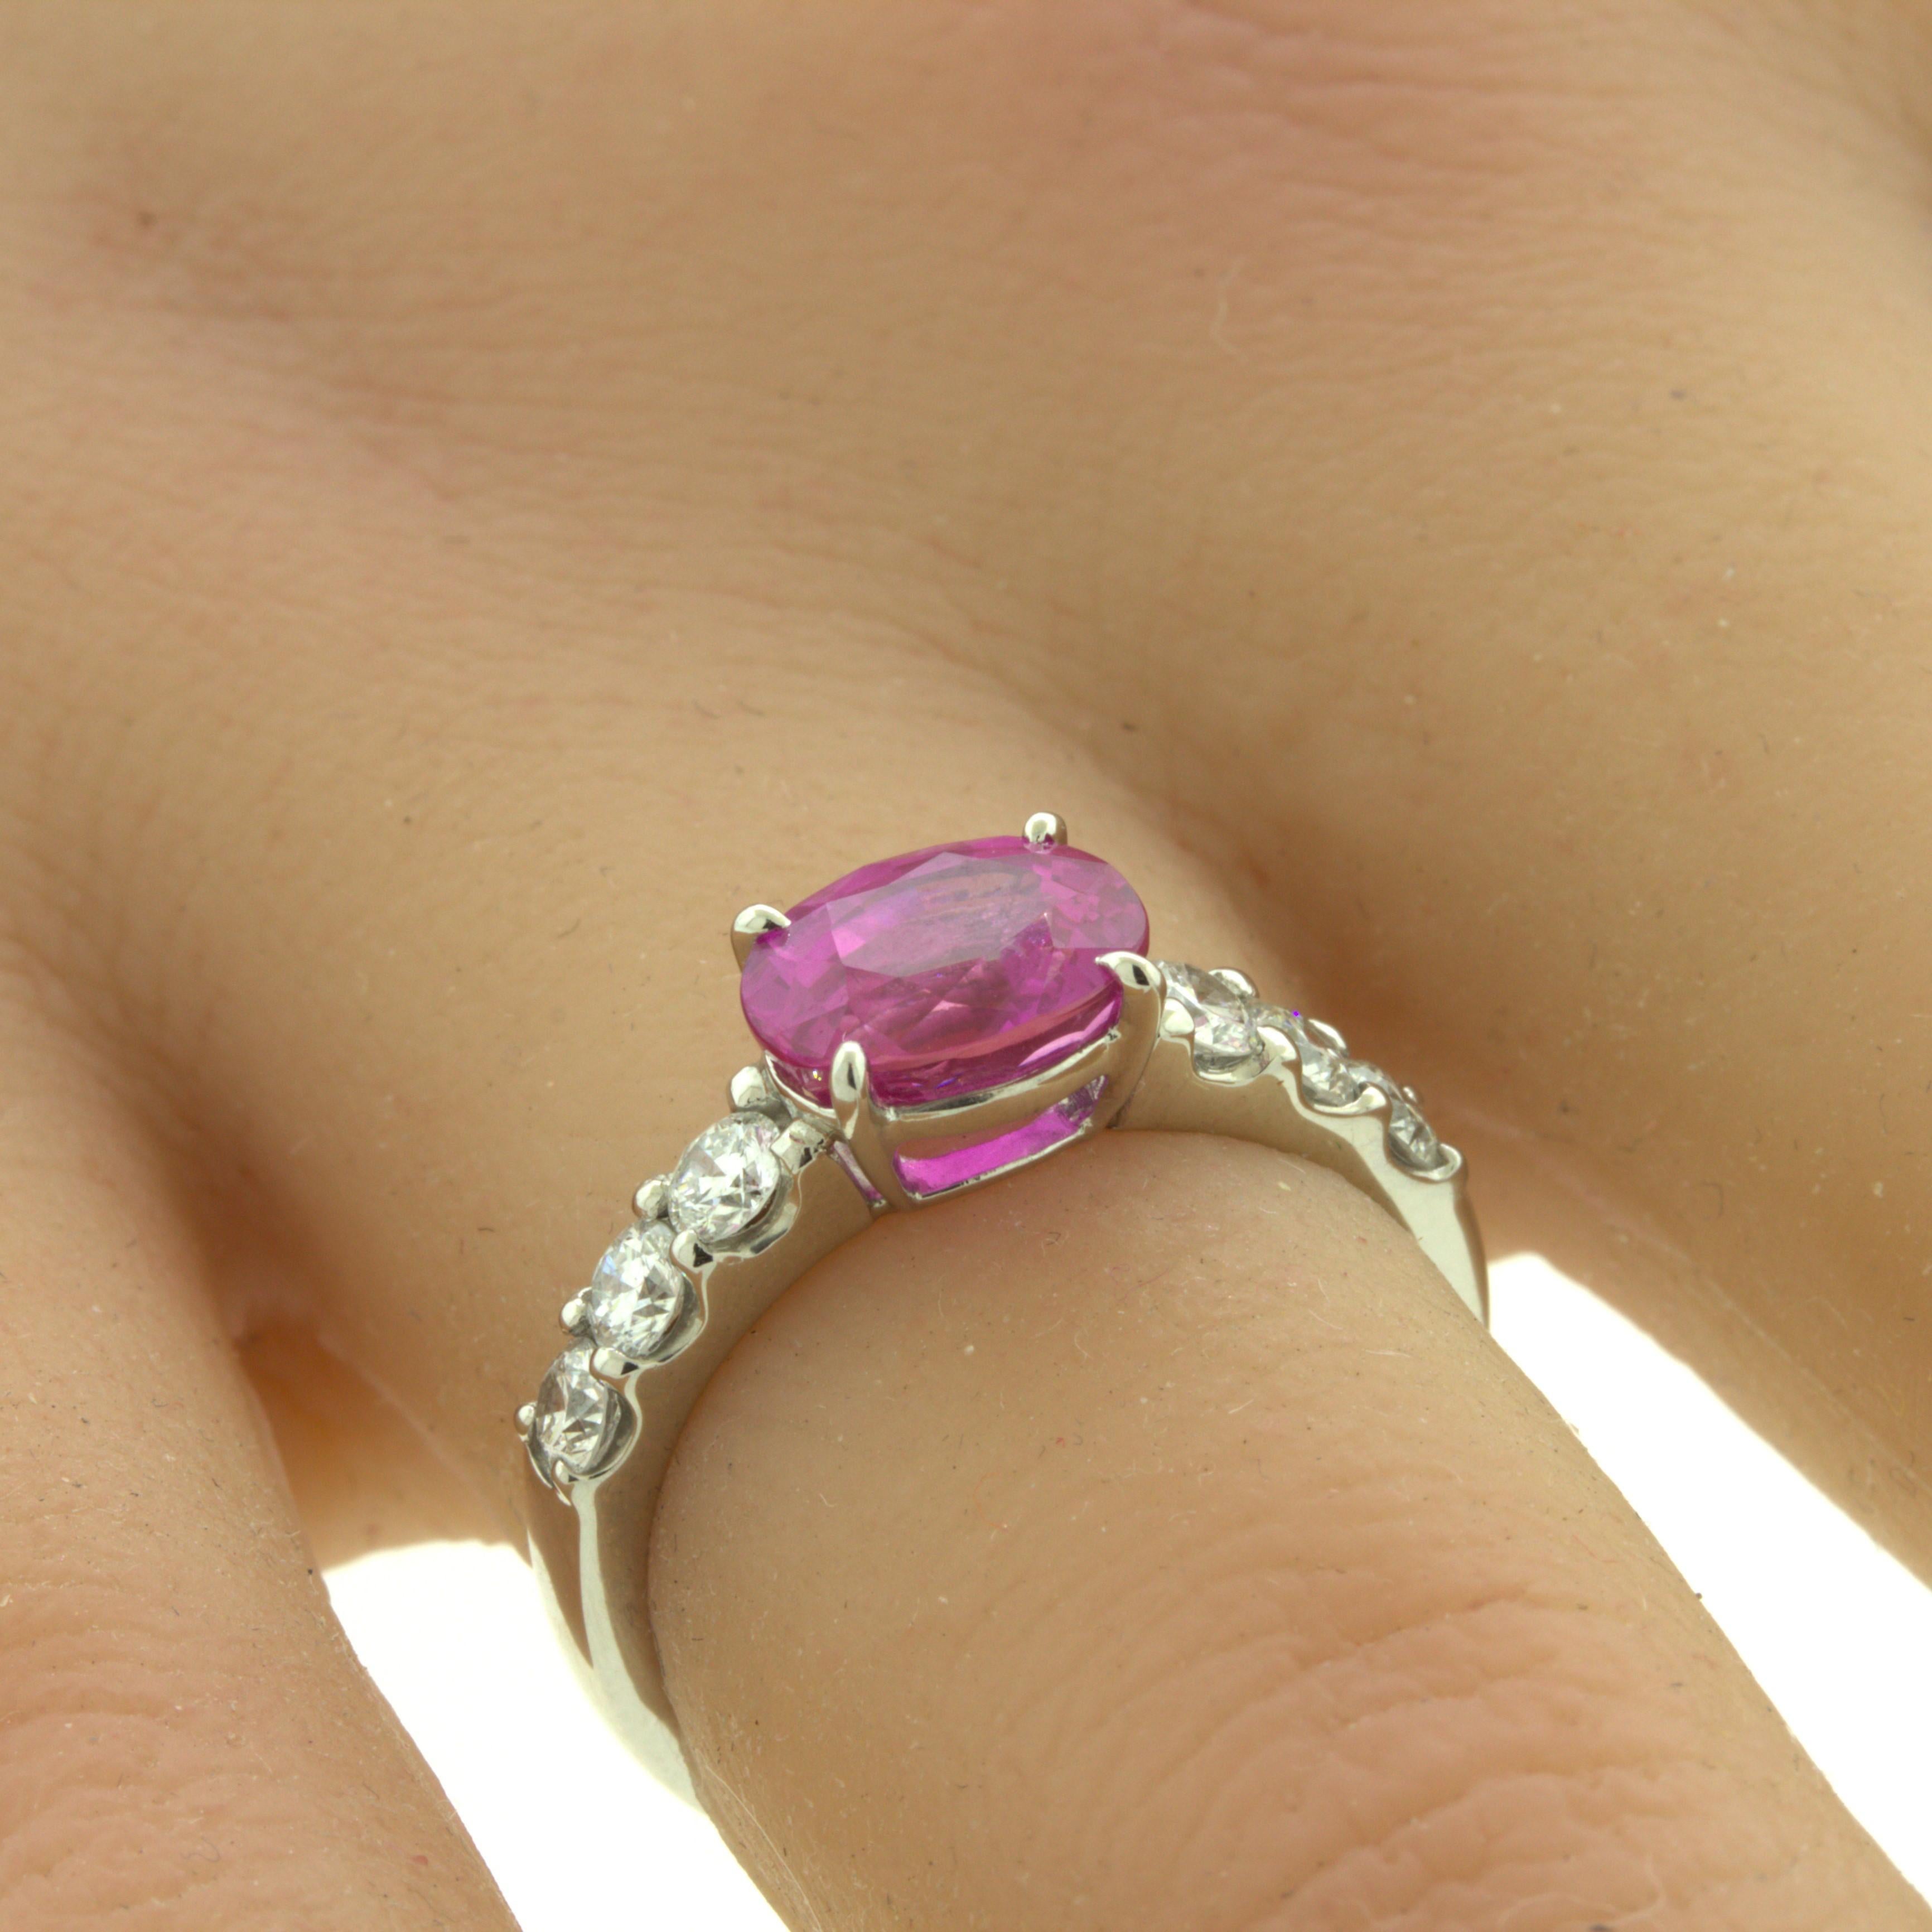 Exceptional 2.36 Carat Hot-Pink Sapphire Diamond Platinum Ring, GIA Certified For Sale 3